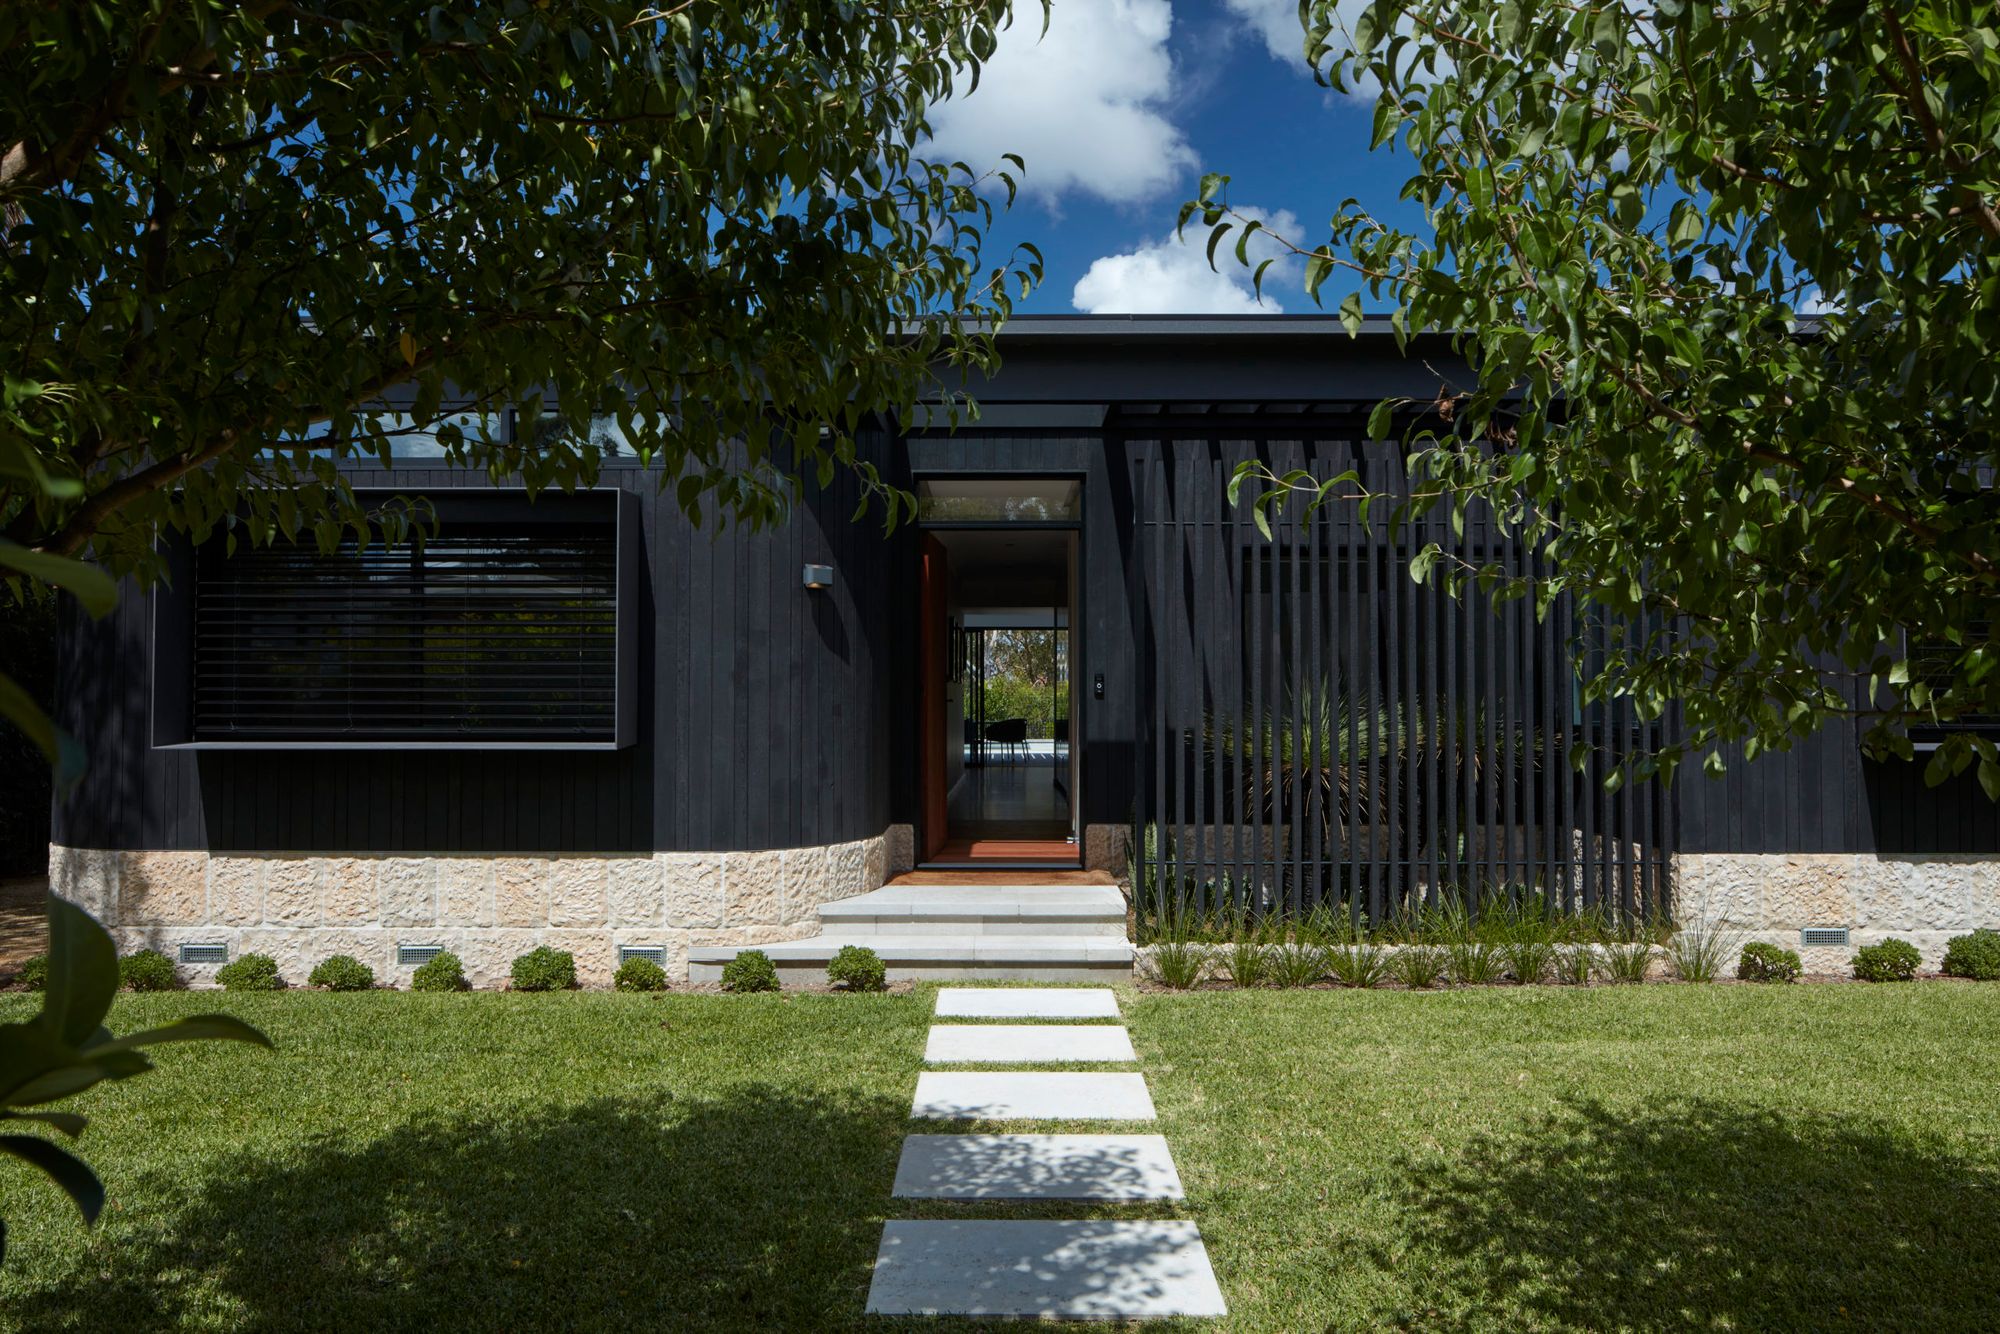 The Pavilion Castlecrag by McNally Architects. Front on home view, looking into entry of home